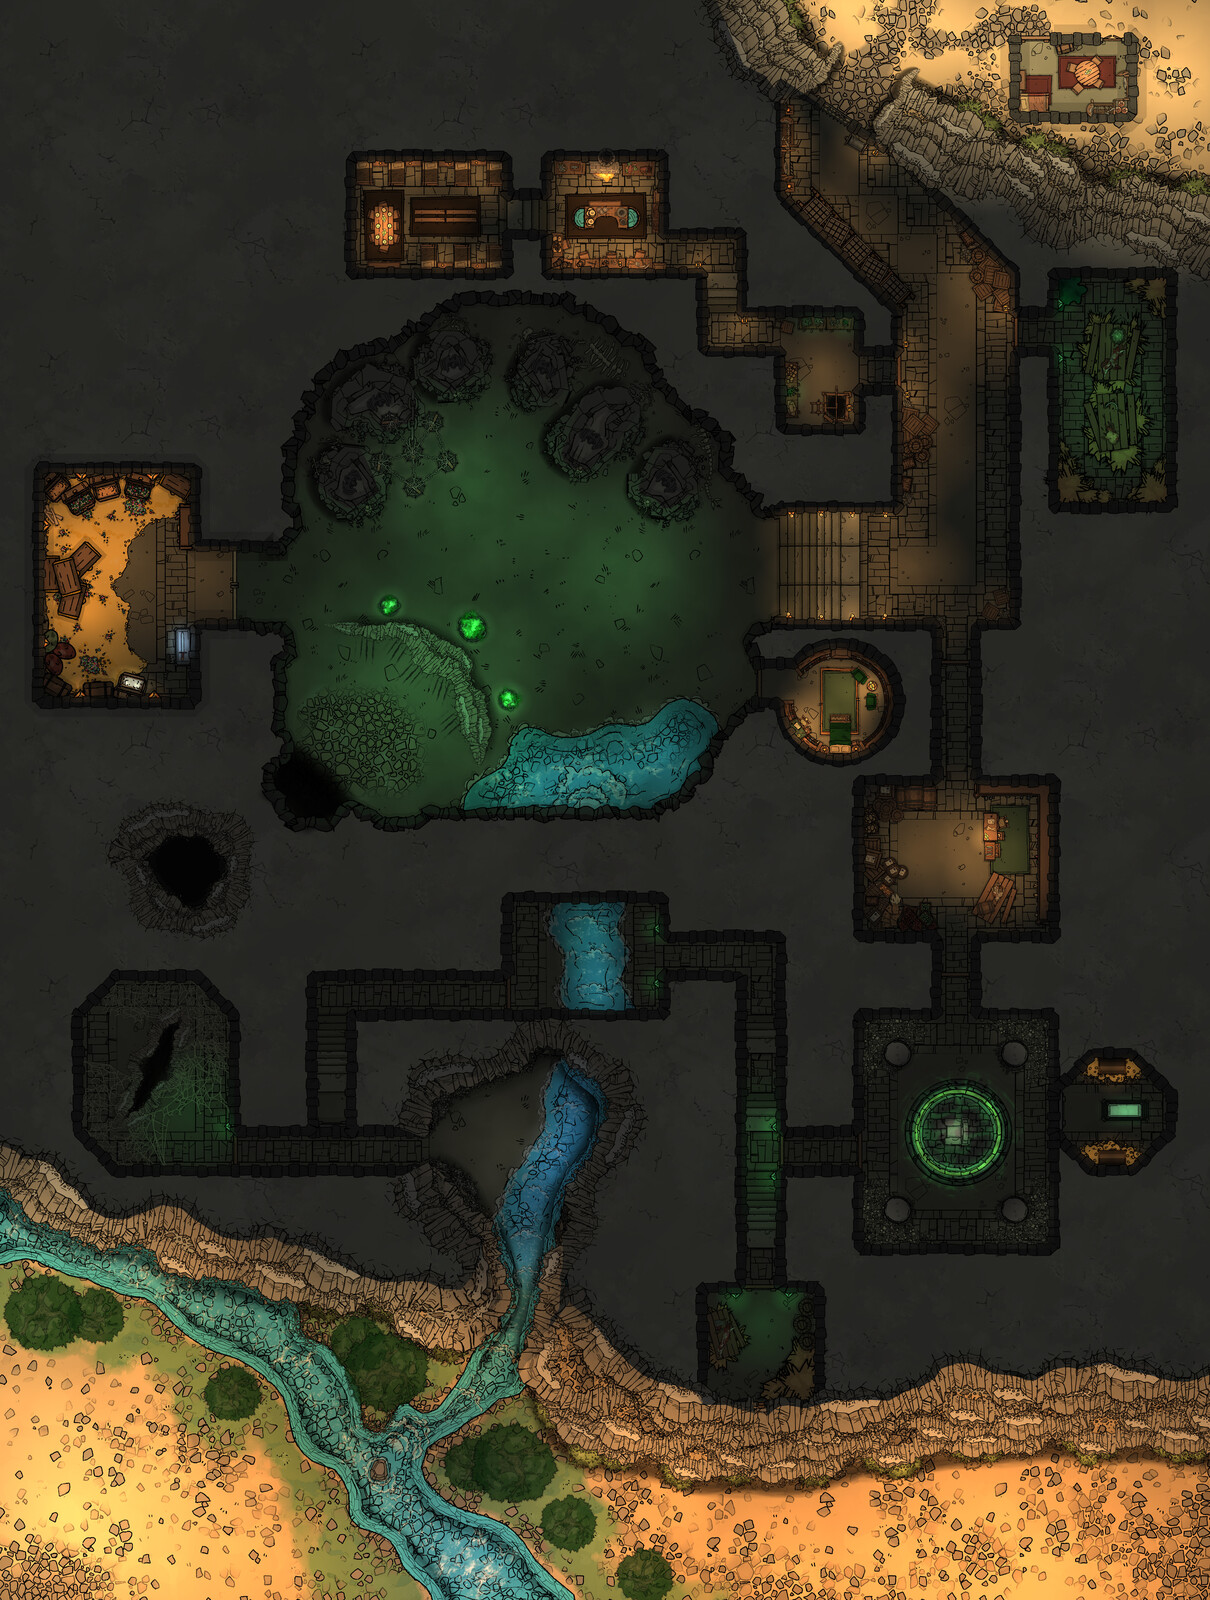 Lair of the Green Wyrm [62 x 82]